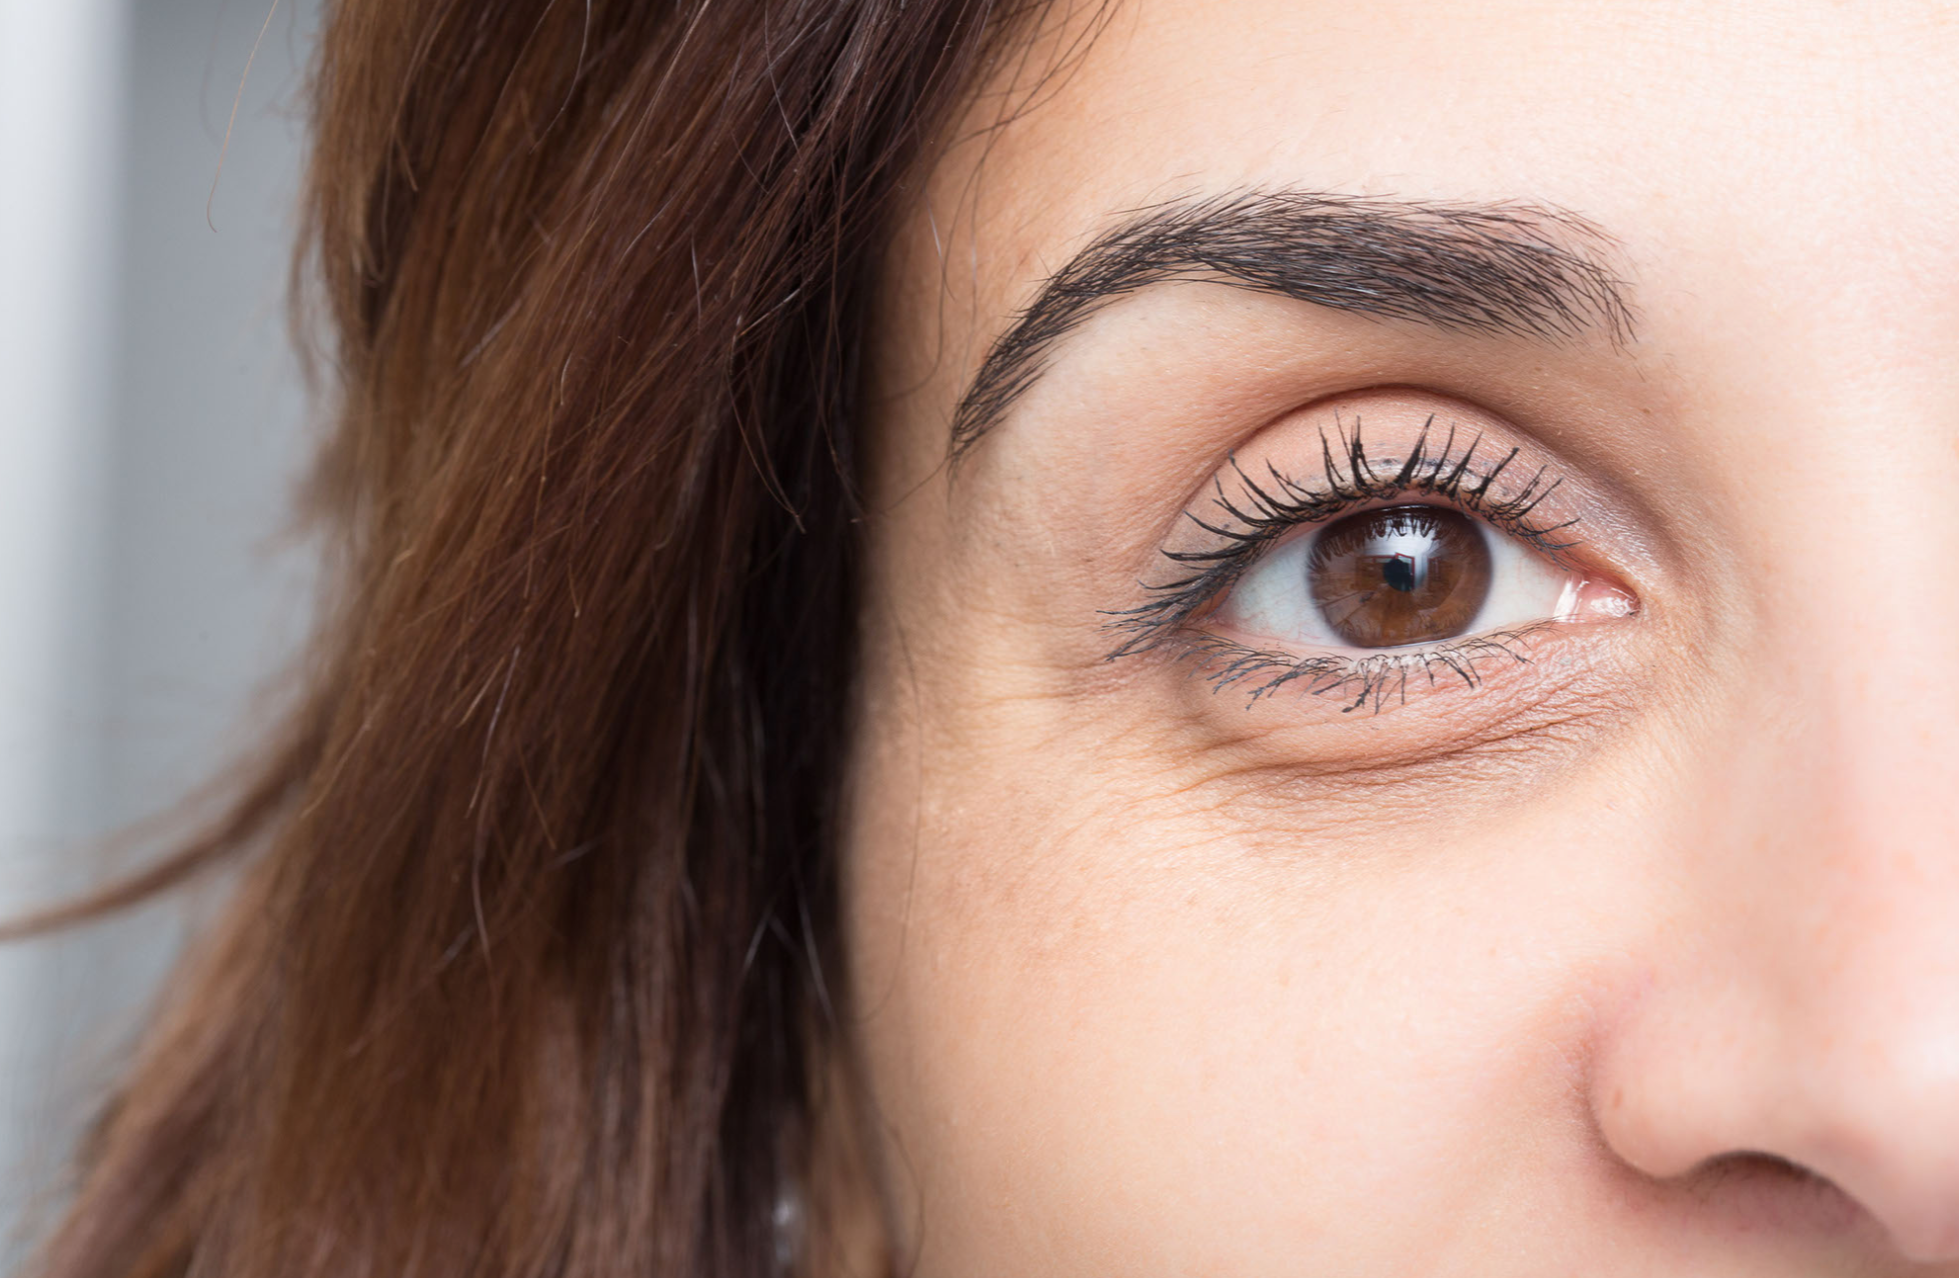 How can I get rid of Dark Circles under the eyes?